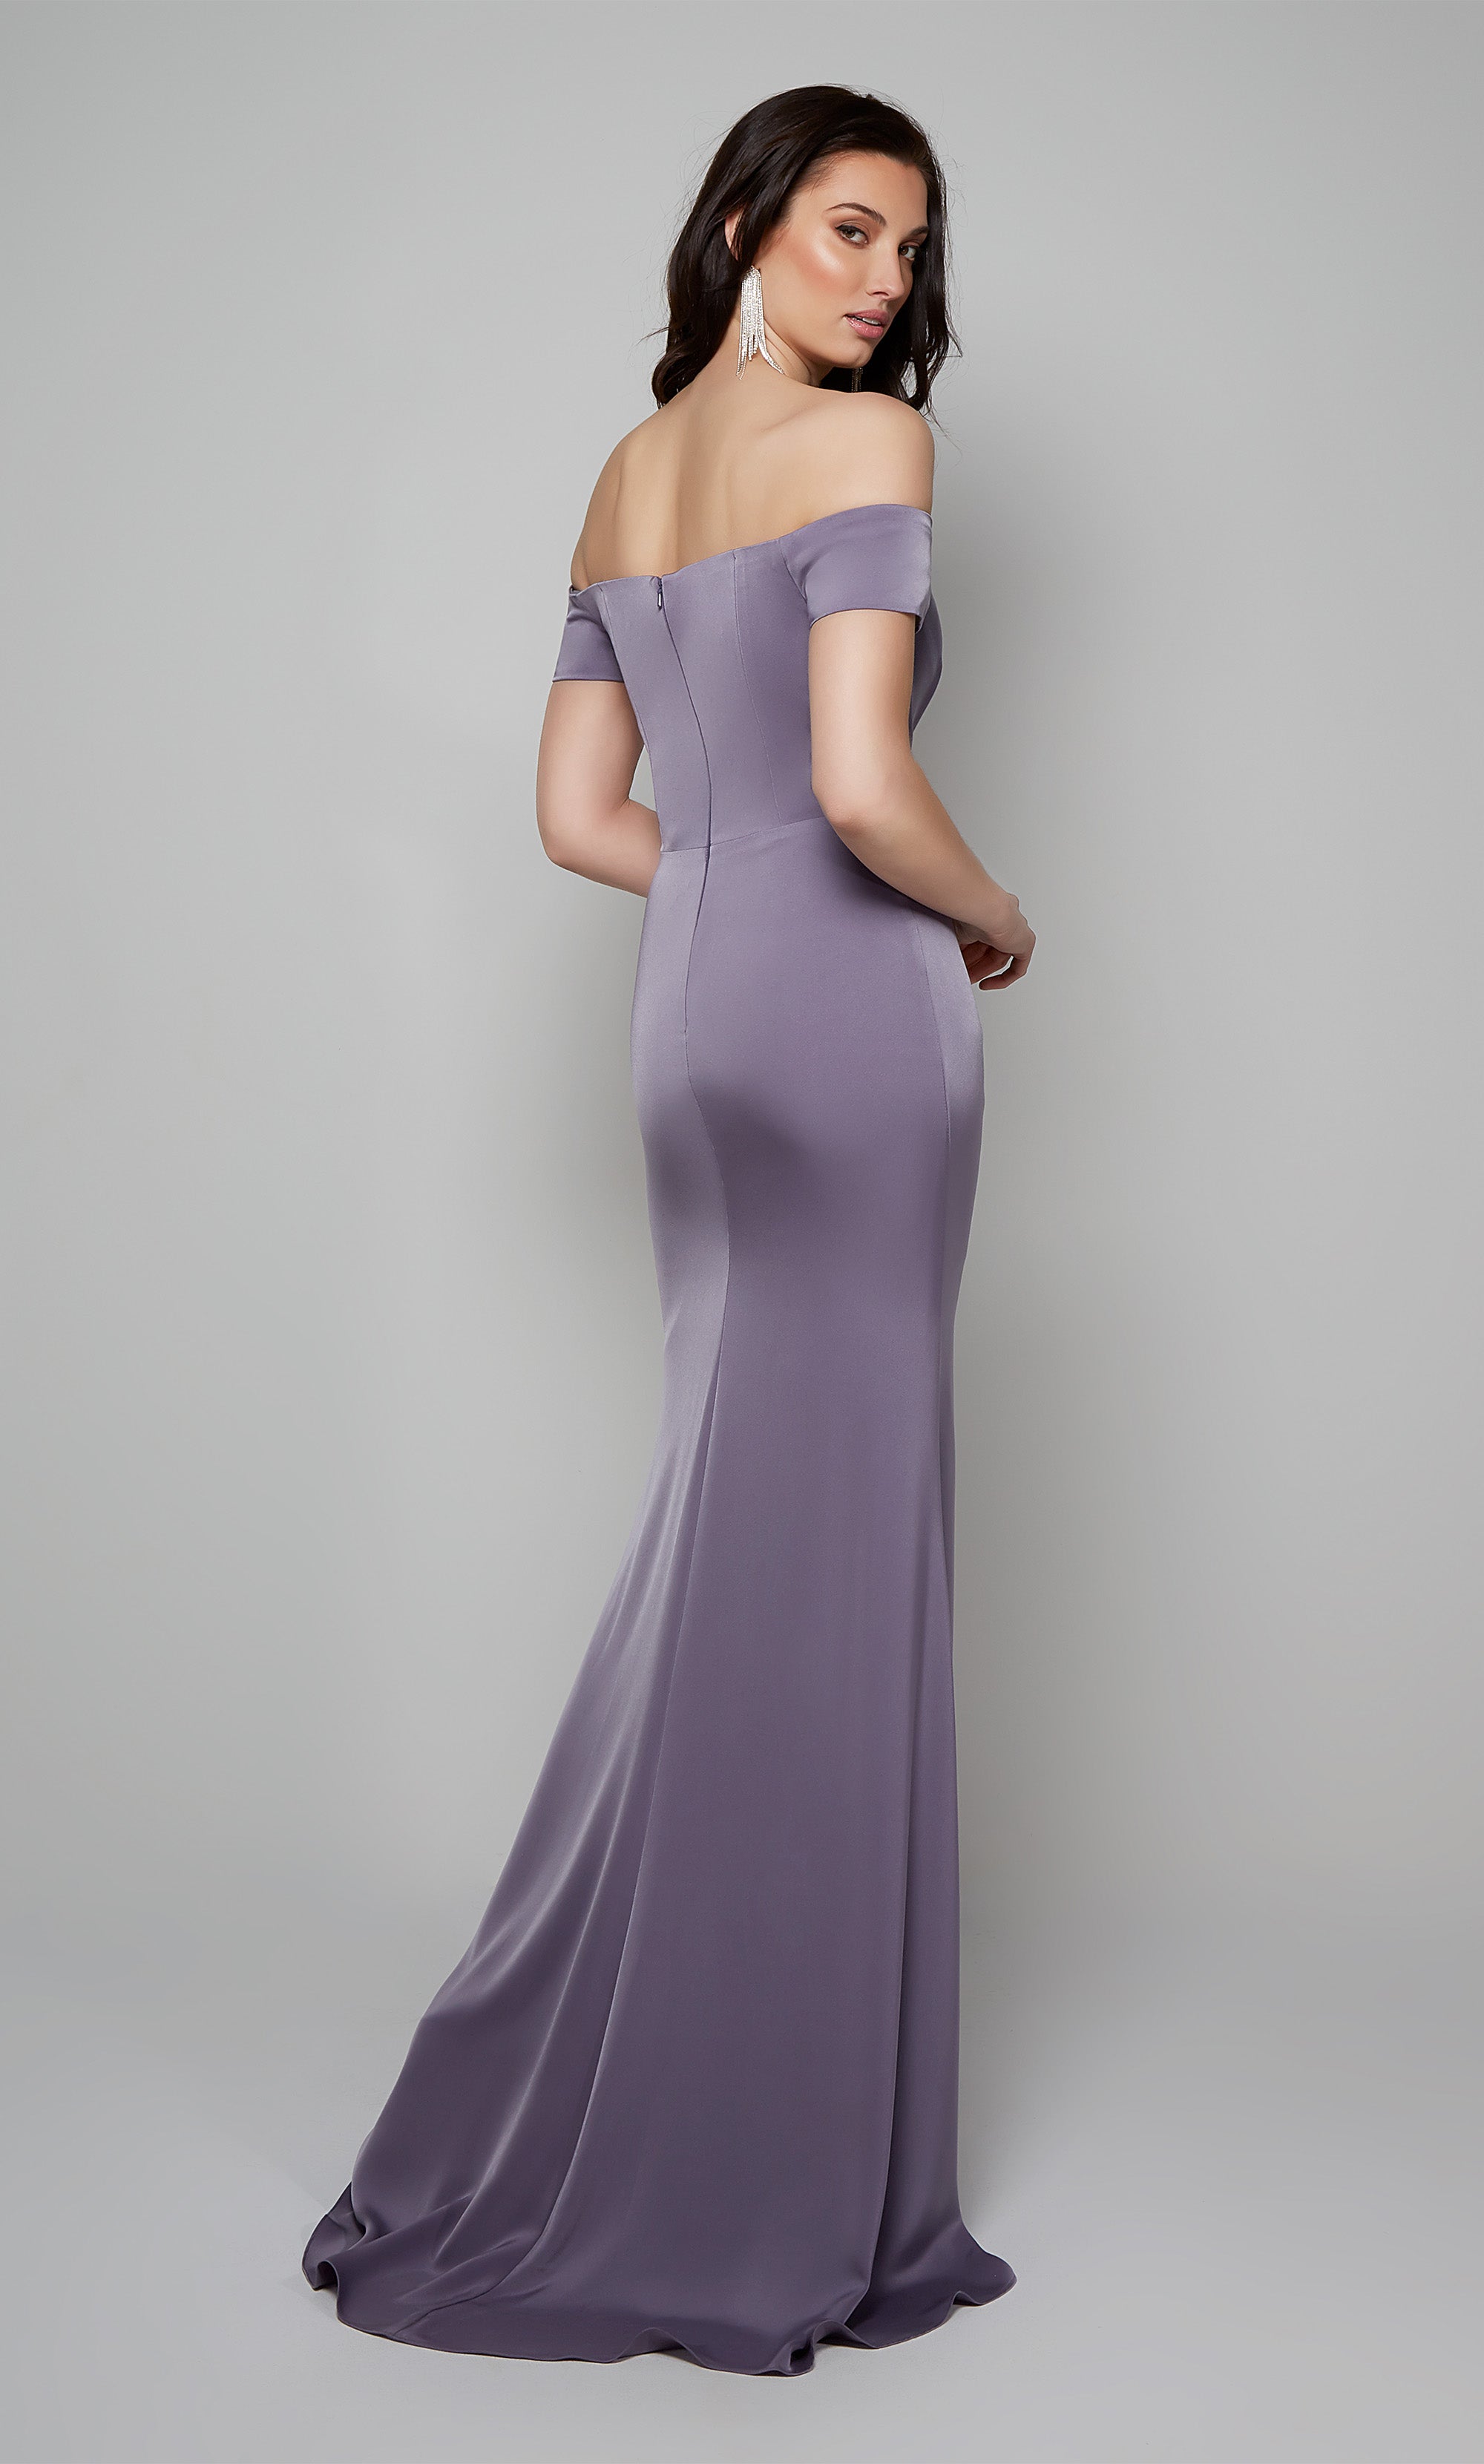 Purple off the shoulder formal dress with pleated bodice, ruching detail, and side slit. Color-SWATCH_27558__PURPLEHAZE